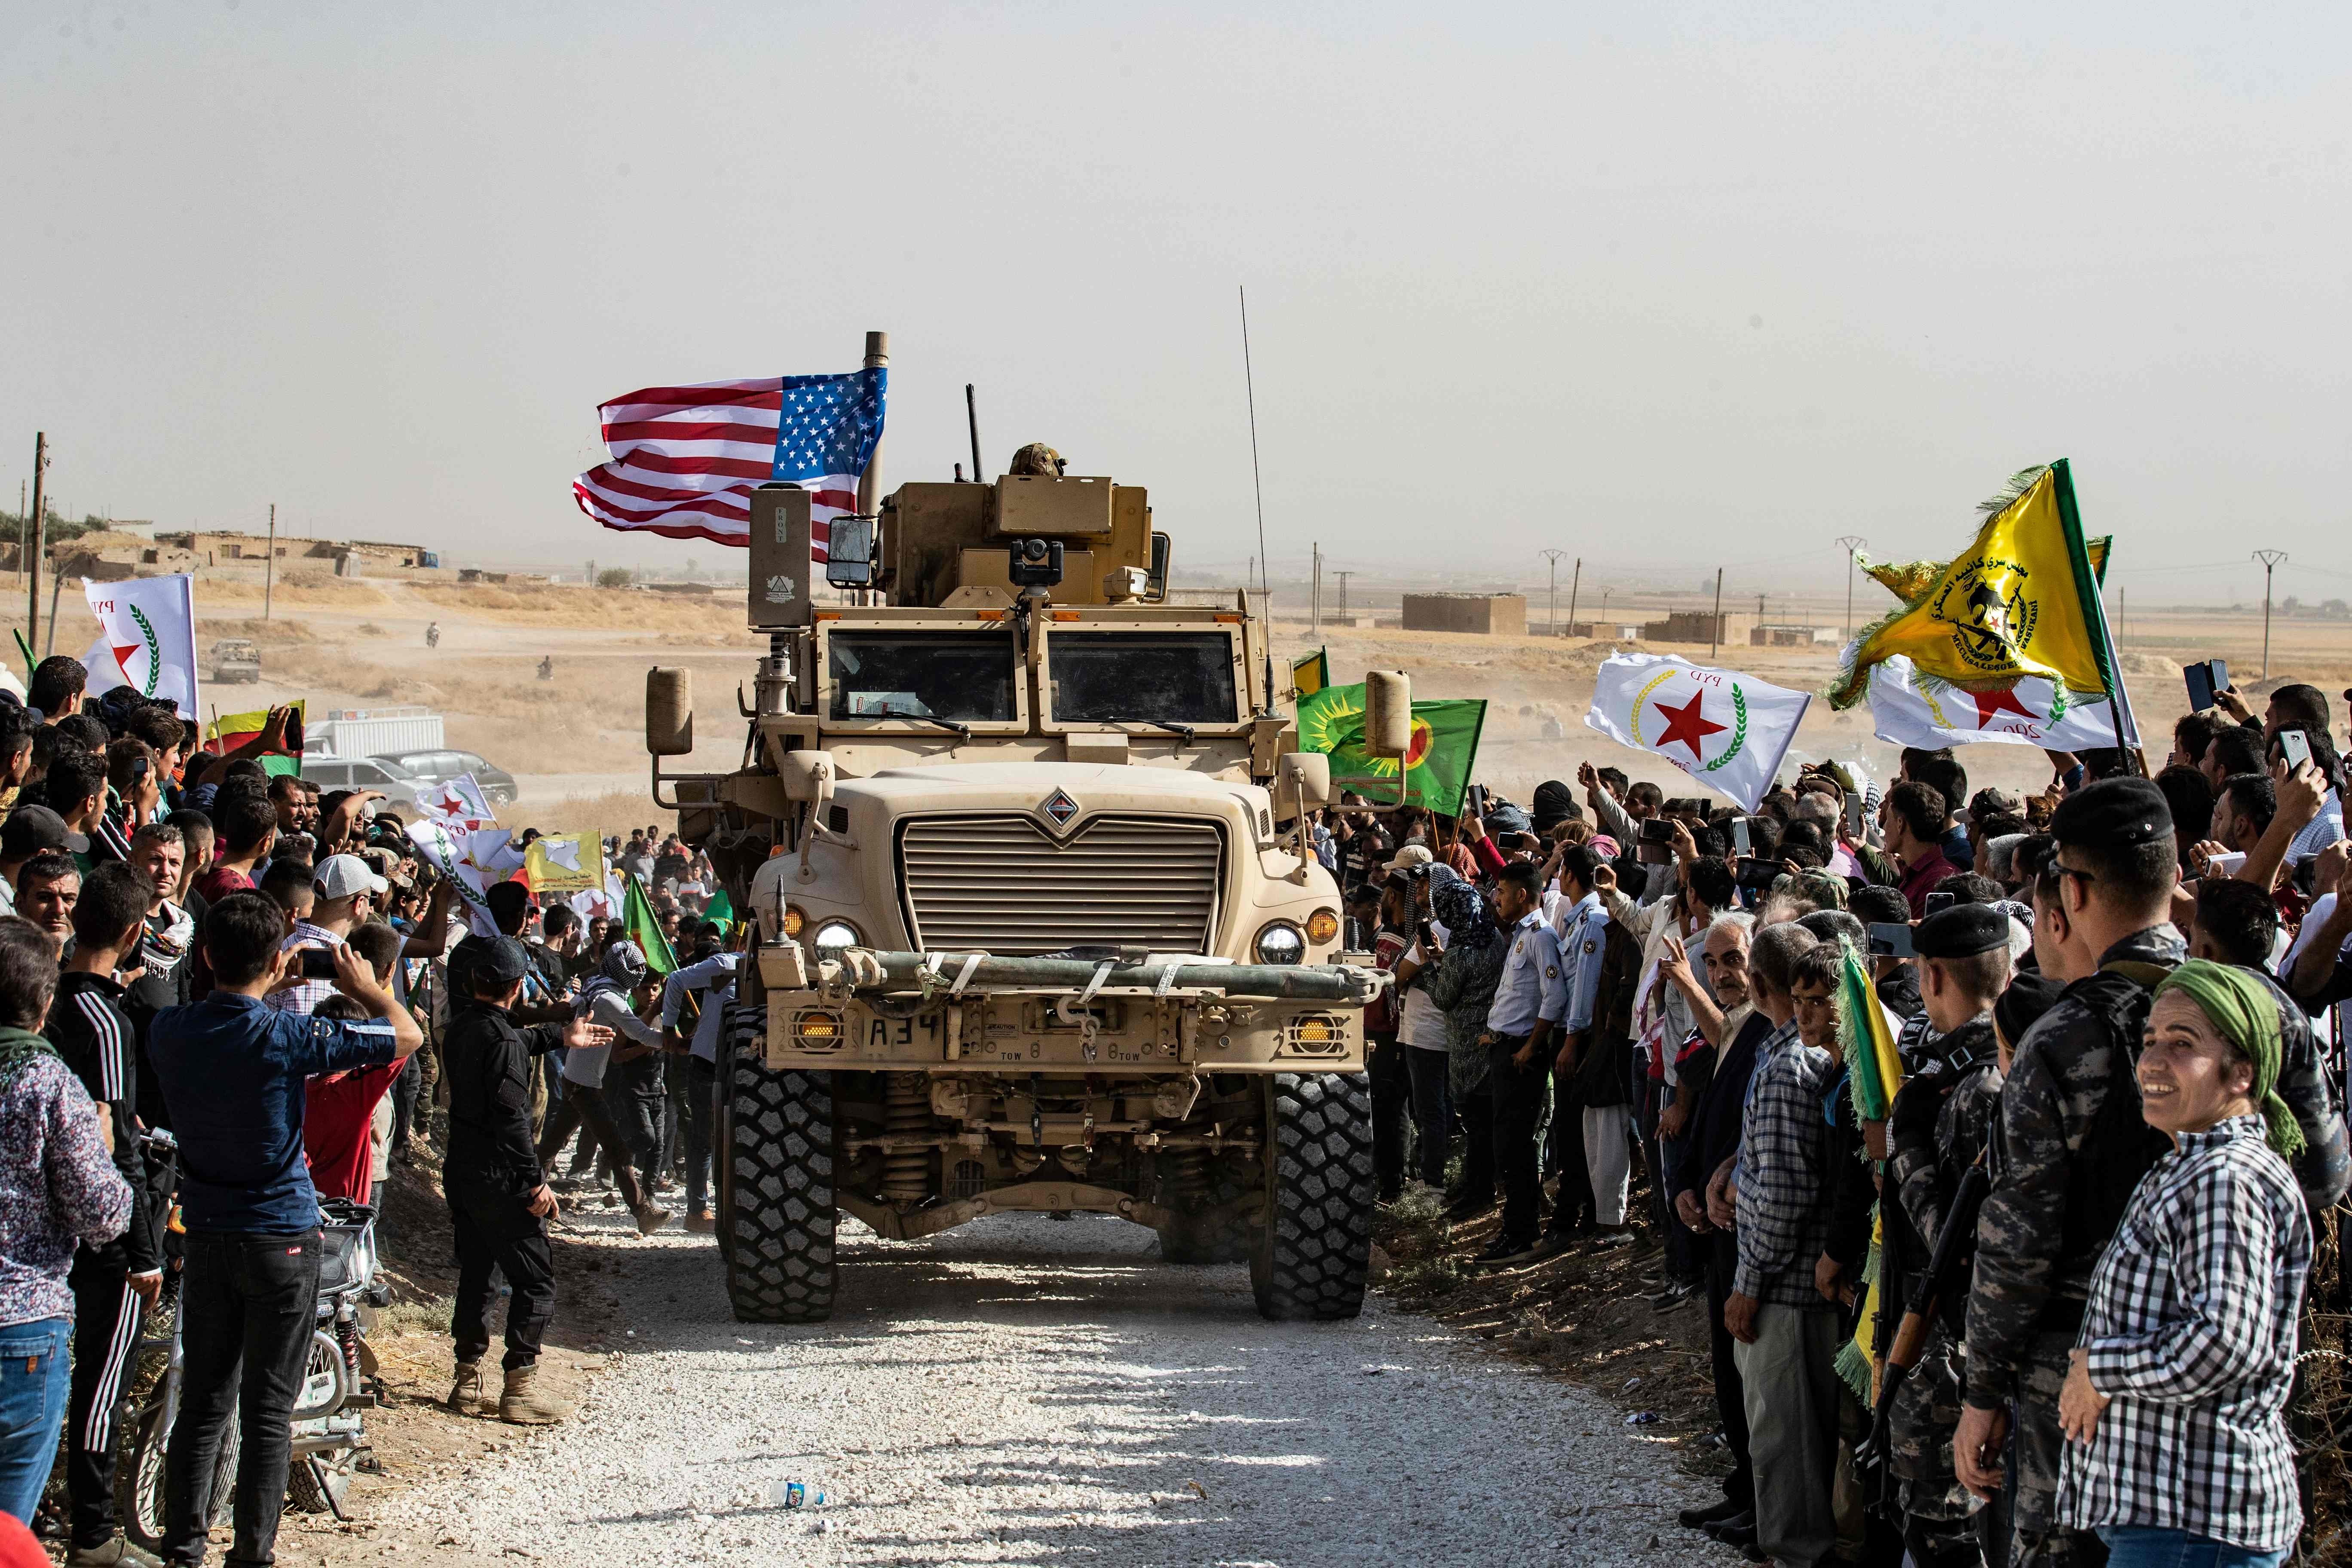 American forces are increasingly attacked in Syrian kurdish-controlled areas